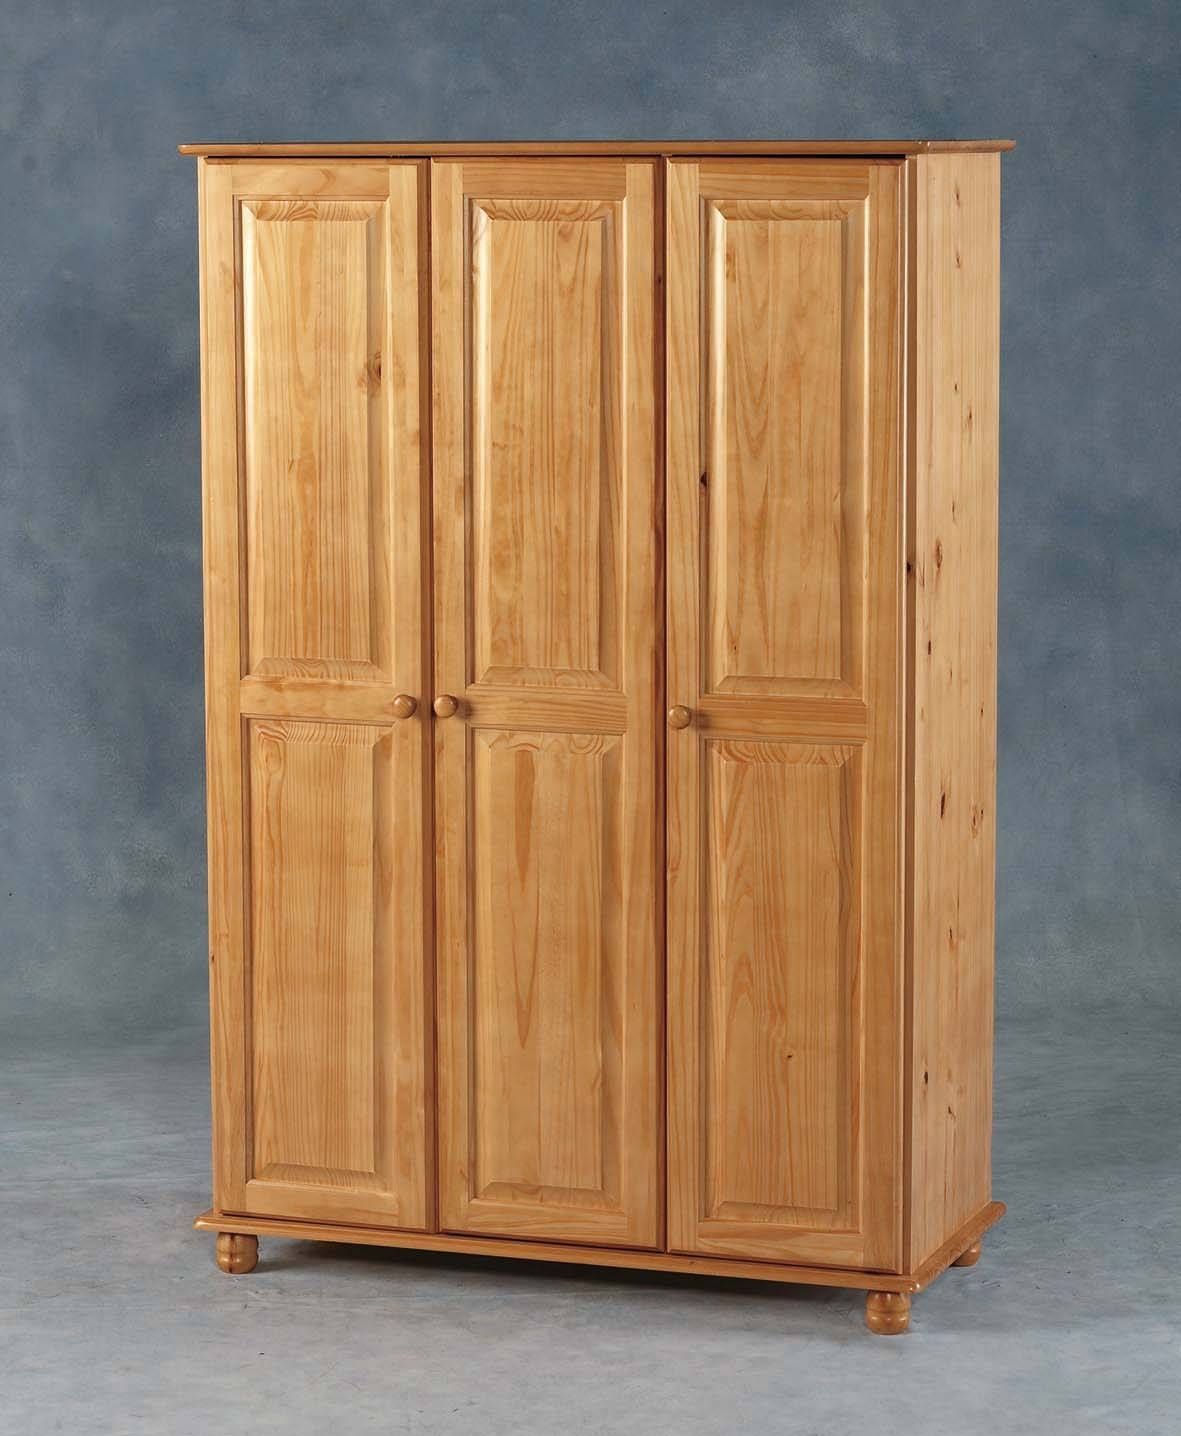 Sol Range (pine) : Tbs Discount Furniture, A Large Selection Of Intended For 3 Door Pine Wardrobes (View 1 of 15)